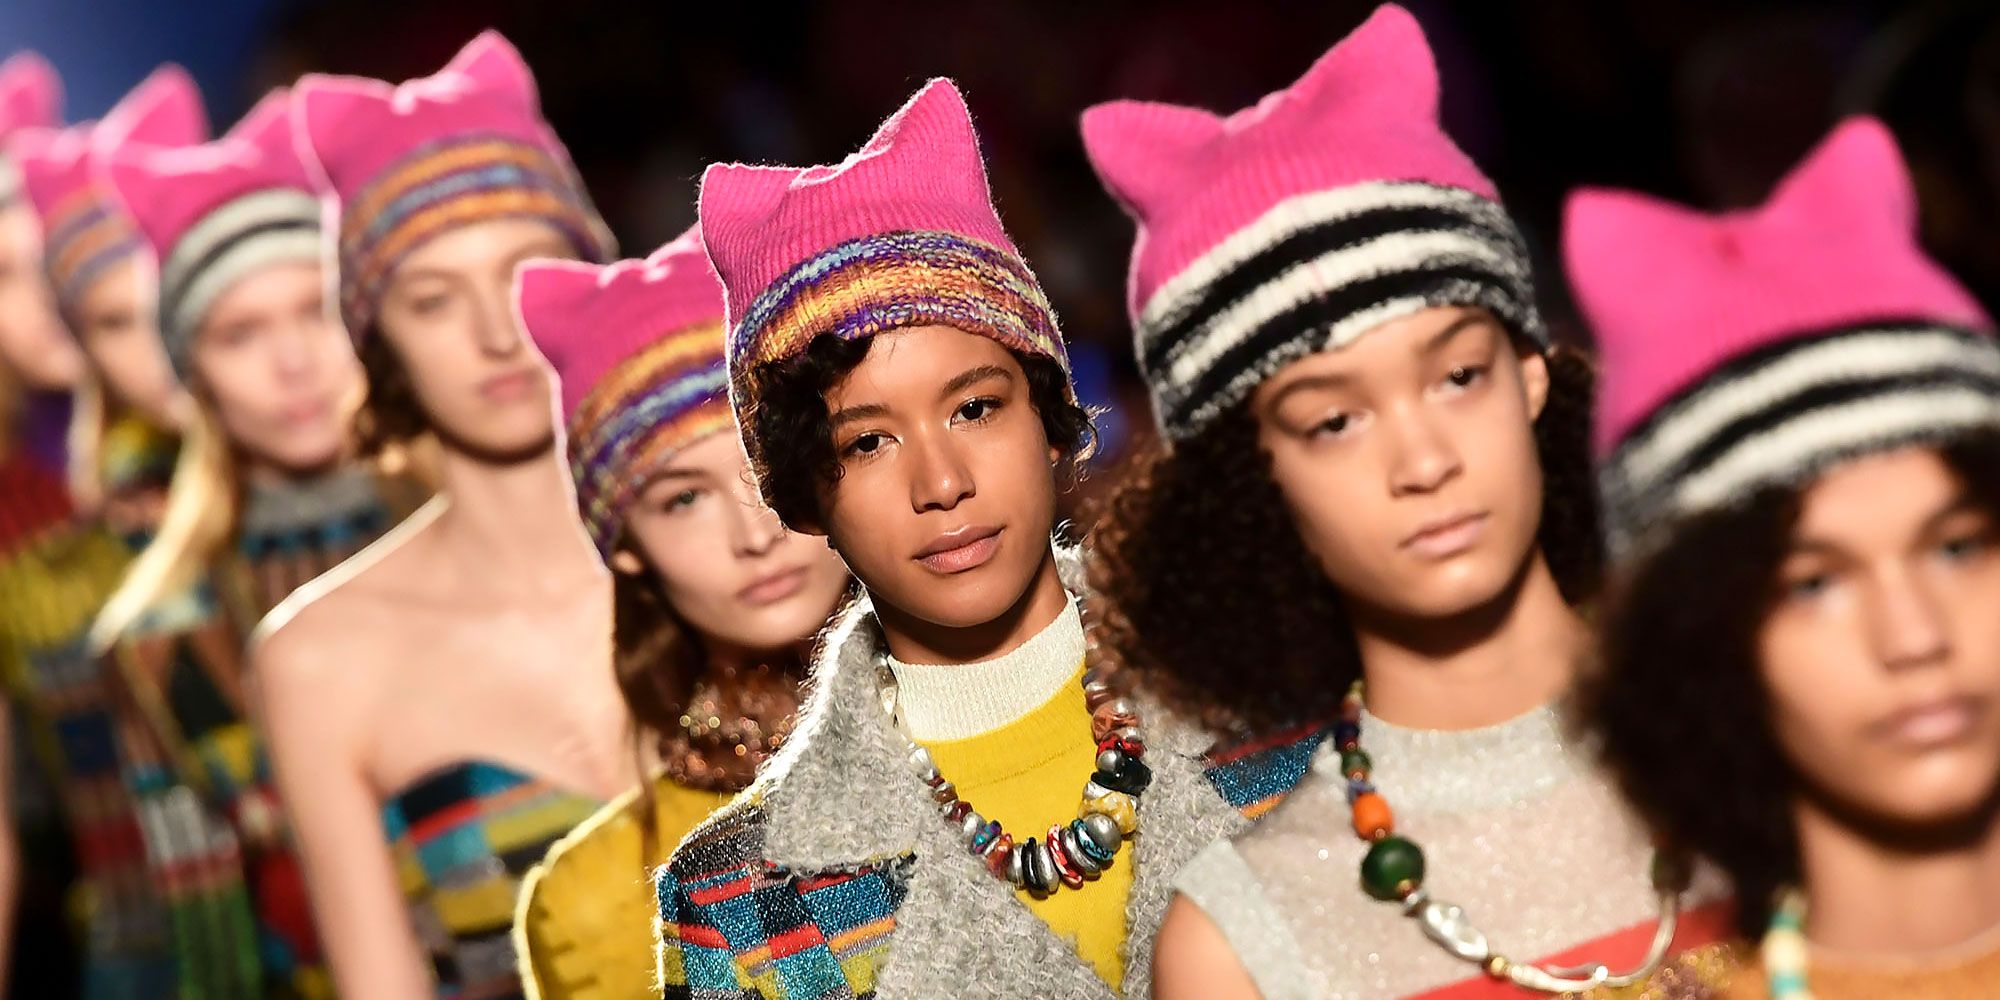 22 Designers Who Are Acting Up and Getting Political on the Runway